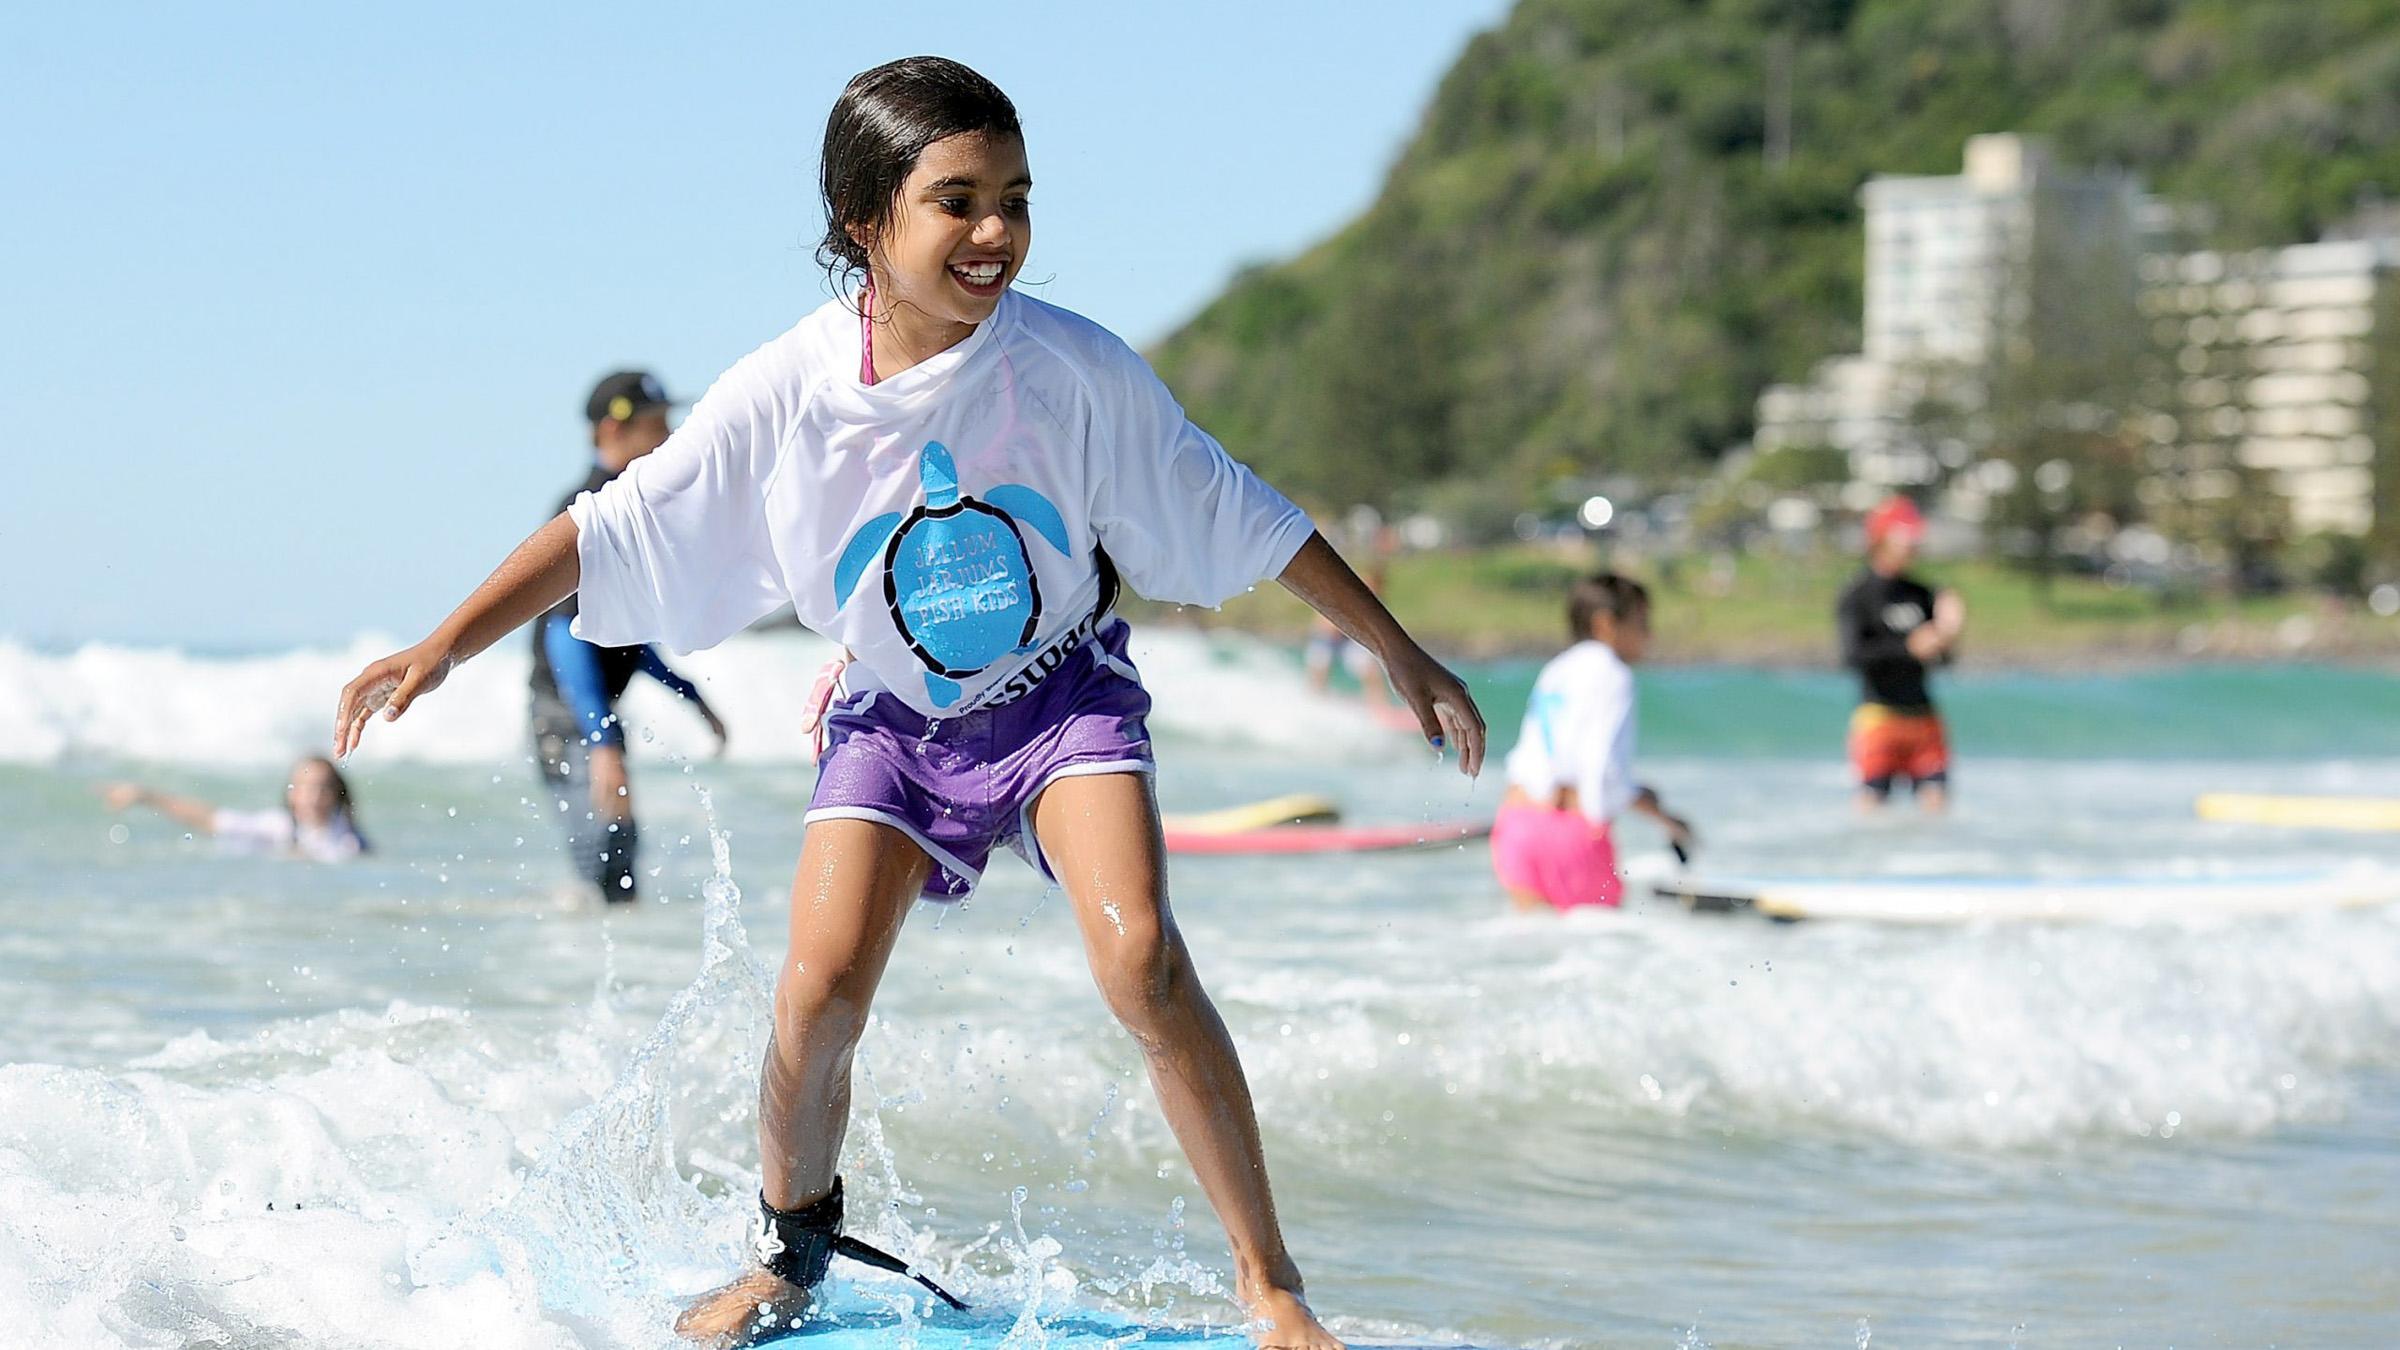 Young surfer standing upright on her board, riding the waves